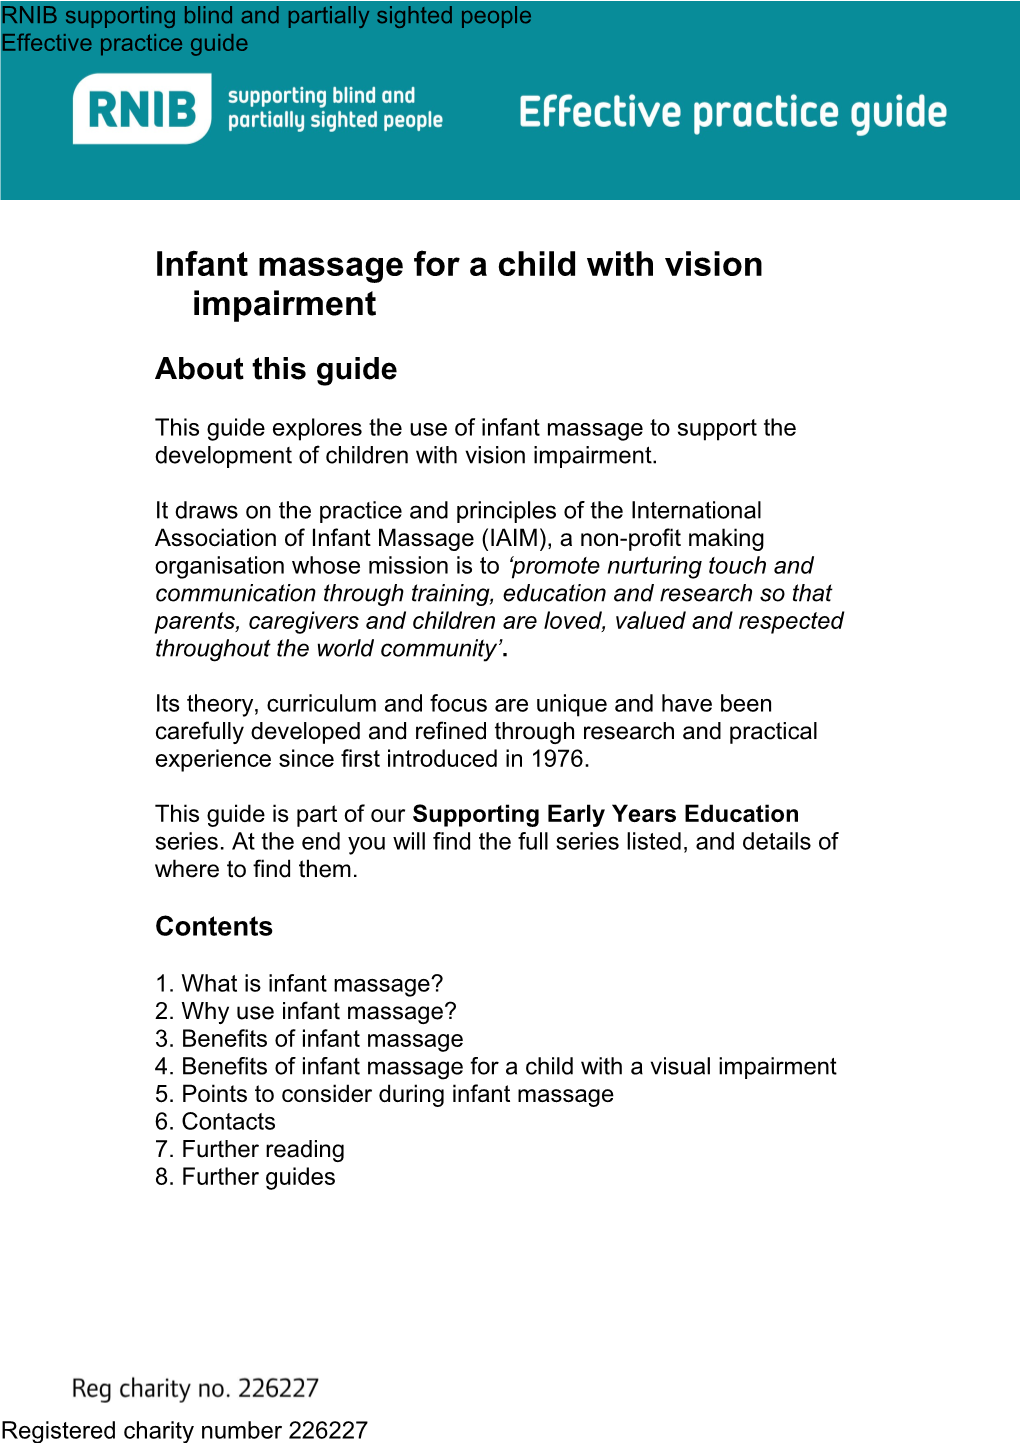 Infant Massage for a Child with Vision Impairment